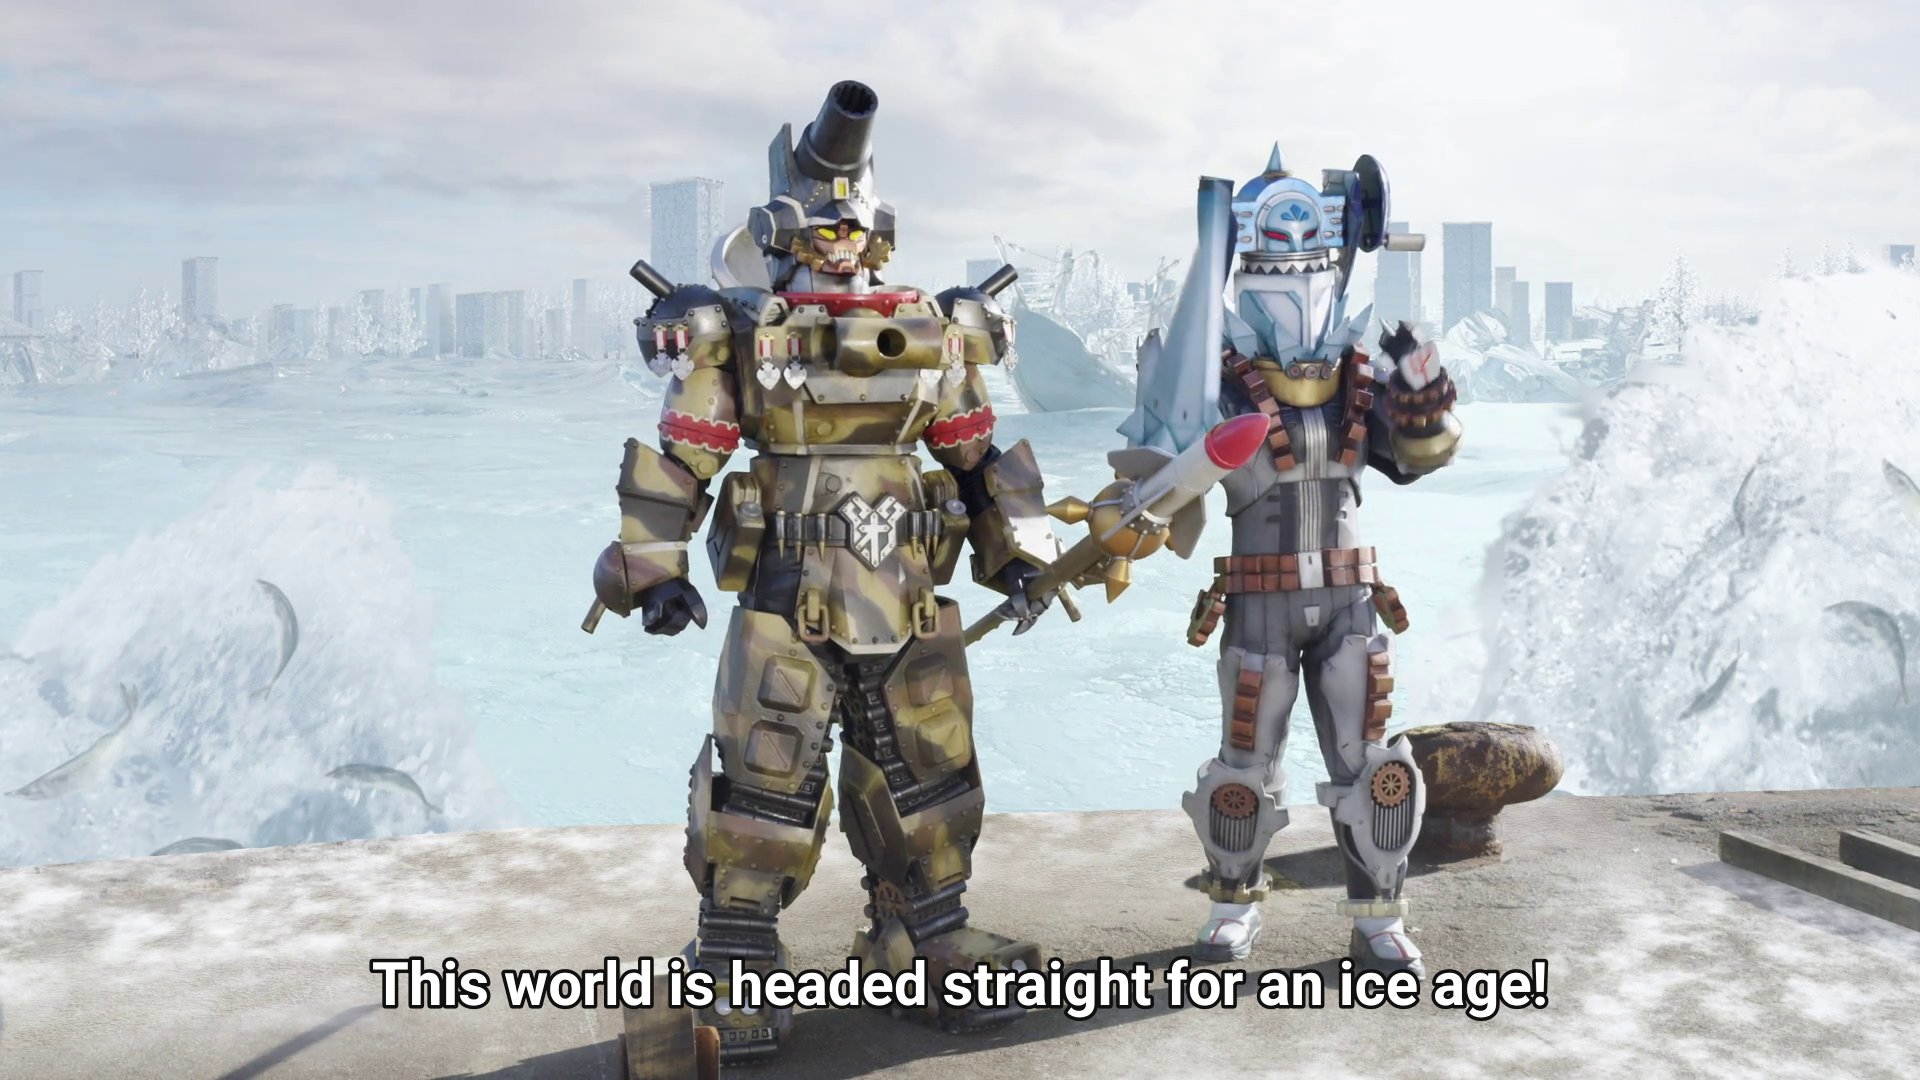 Barashitara, a tank based robot, and a shaved ice themed robot.  Subtitles: This world is headed straight for an ice age!